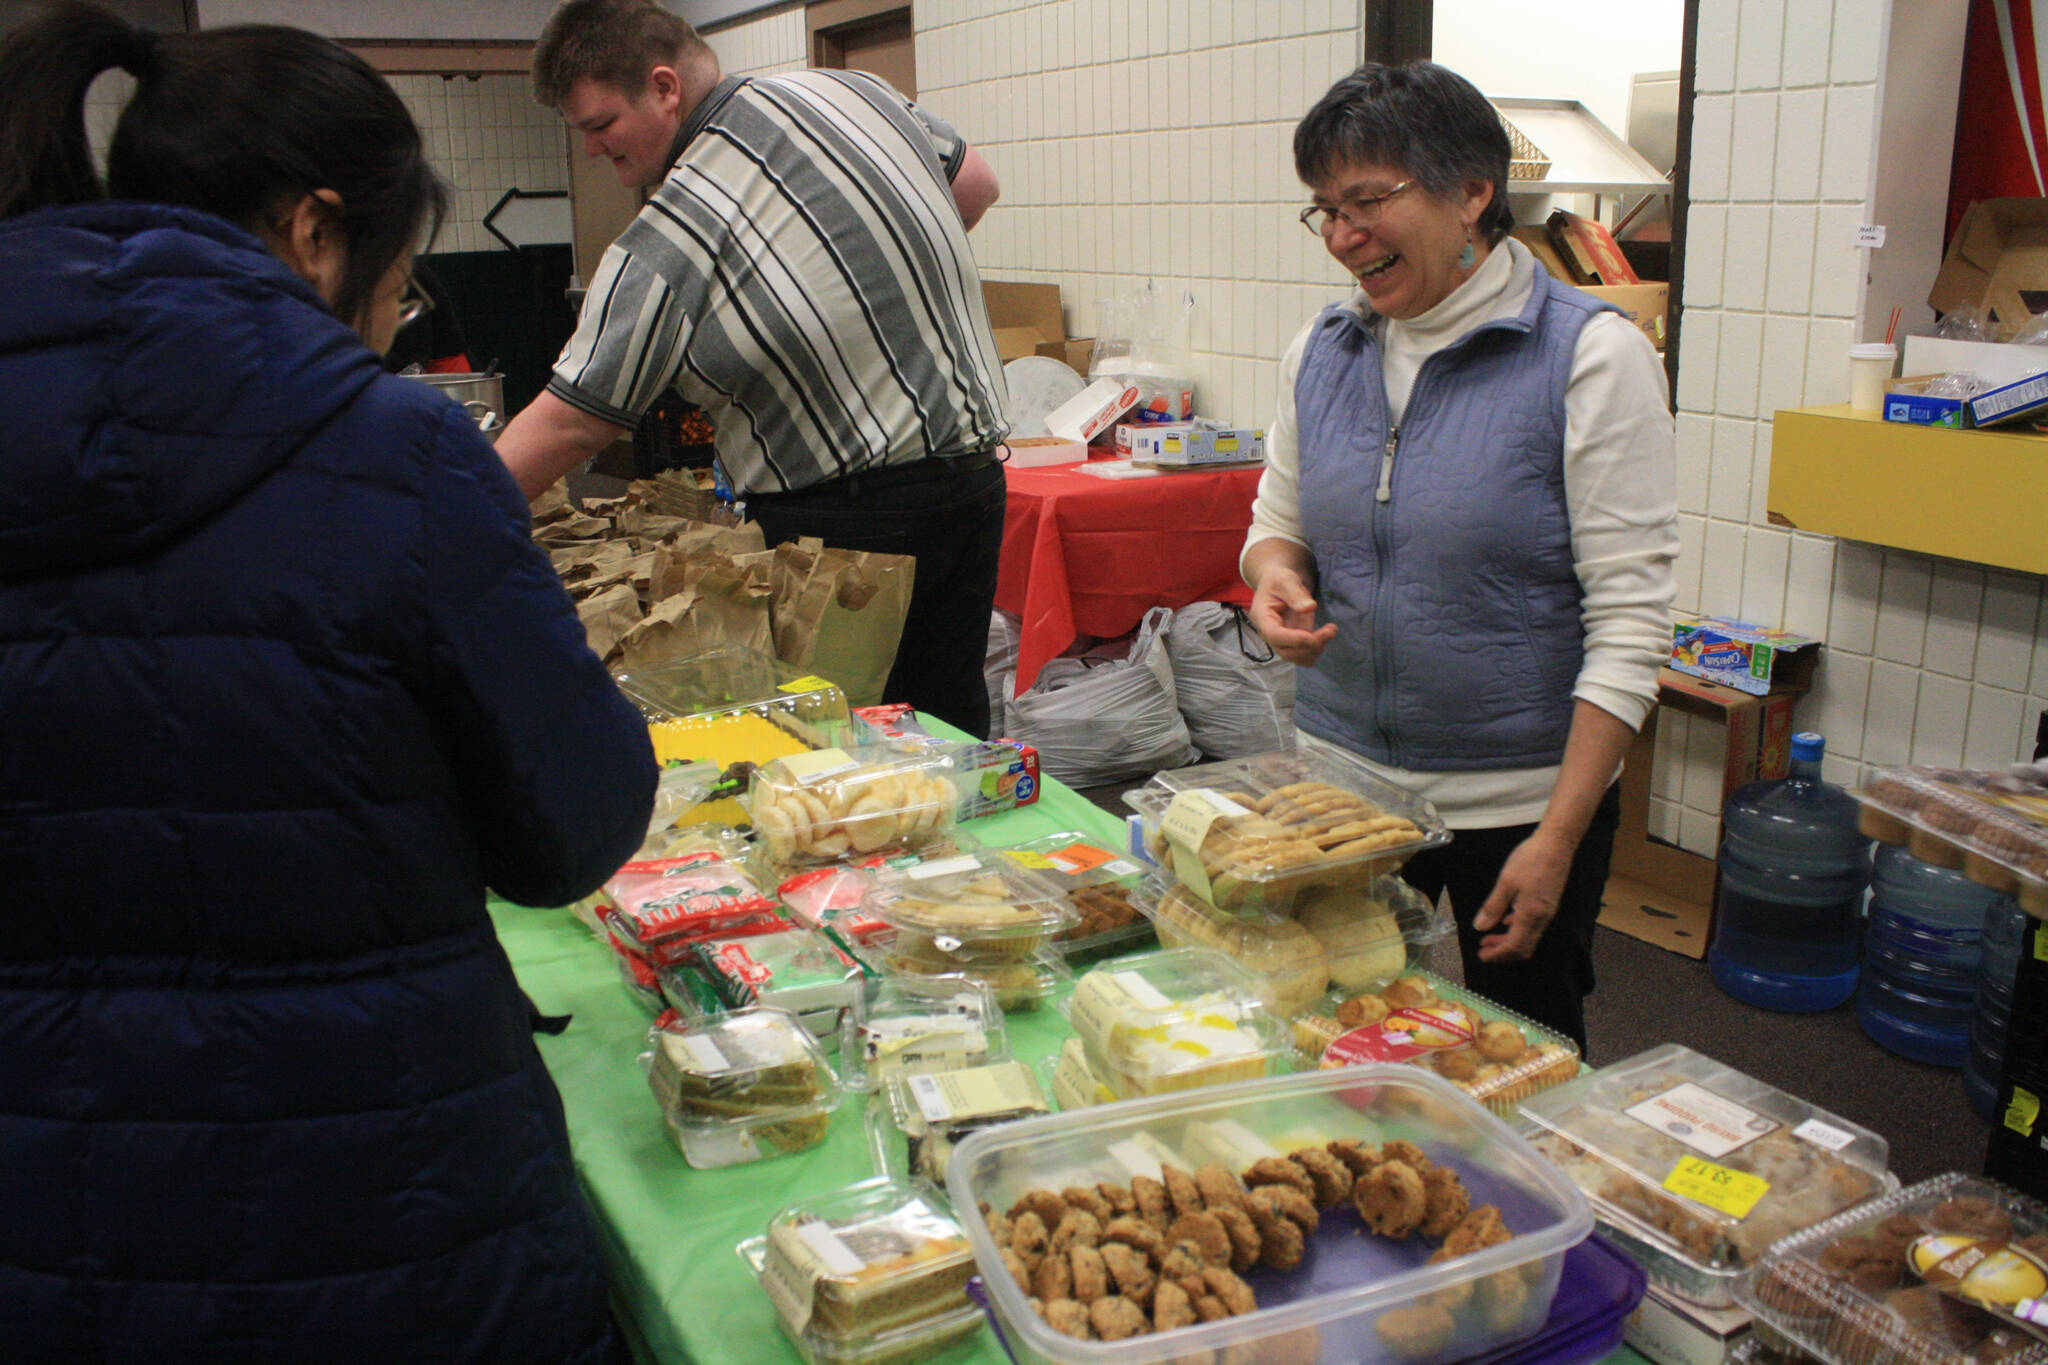 Volunteers serve food during Project Homeless Connect on Jan. 25, 2018, at the Soldotna Regional Sports Complex in Soldotna, Alaska. (Erin Thompson/Peninsula Clarion file)